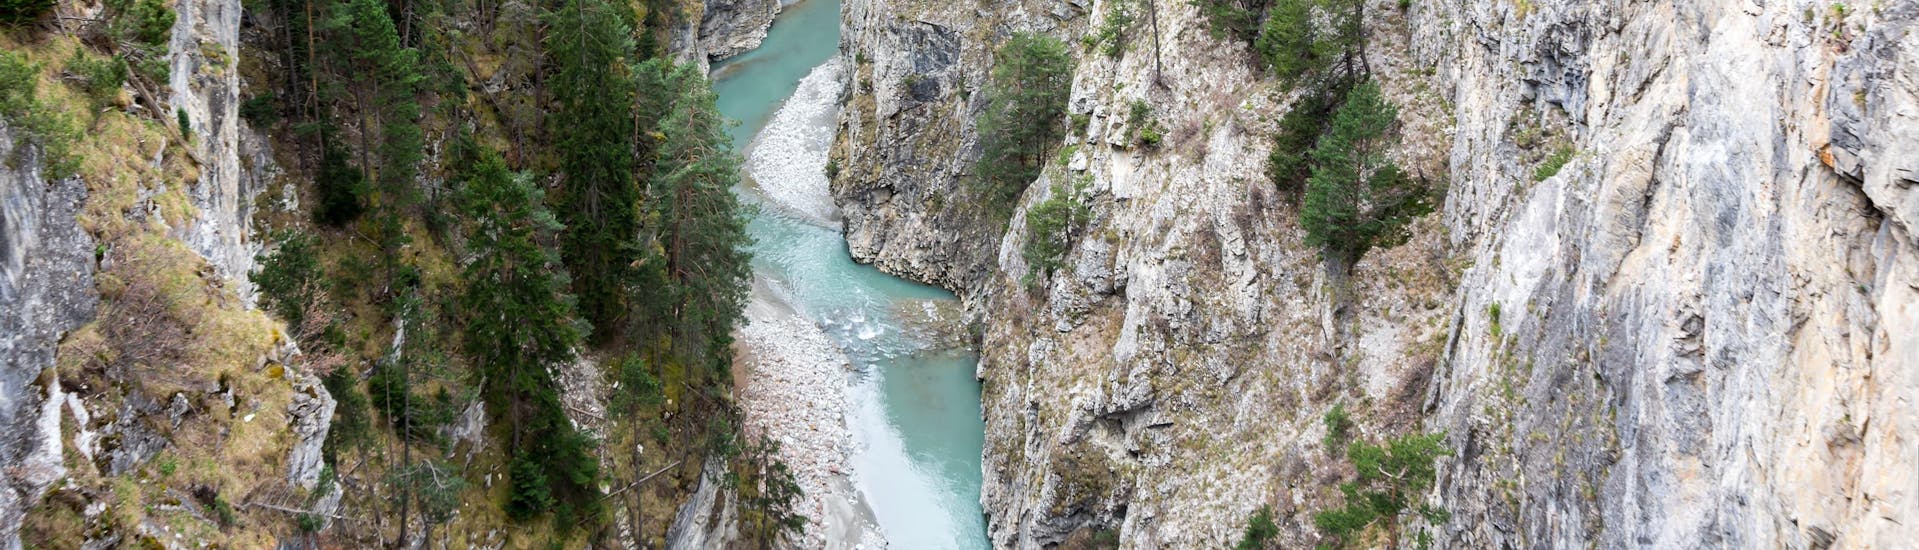 View of a gorge in the Annecy area where you can do canyonin in the Montmin Canyon.